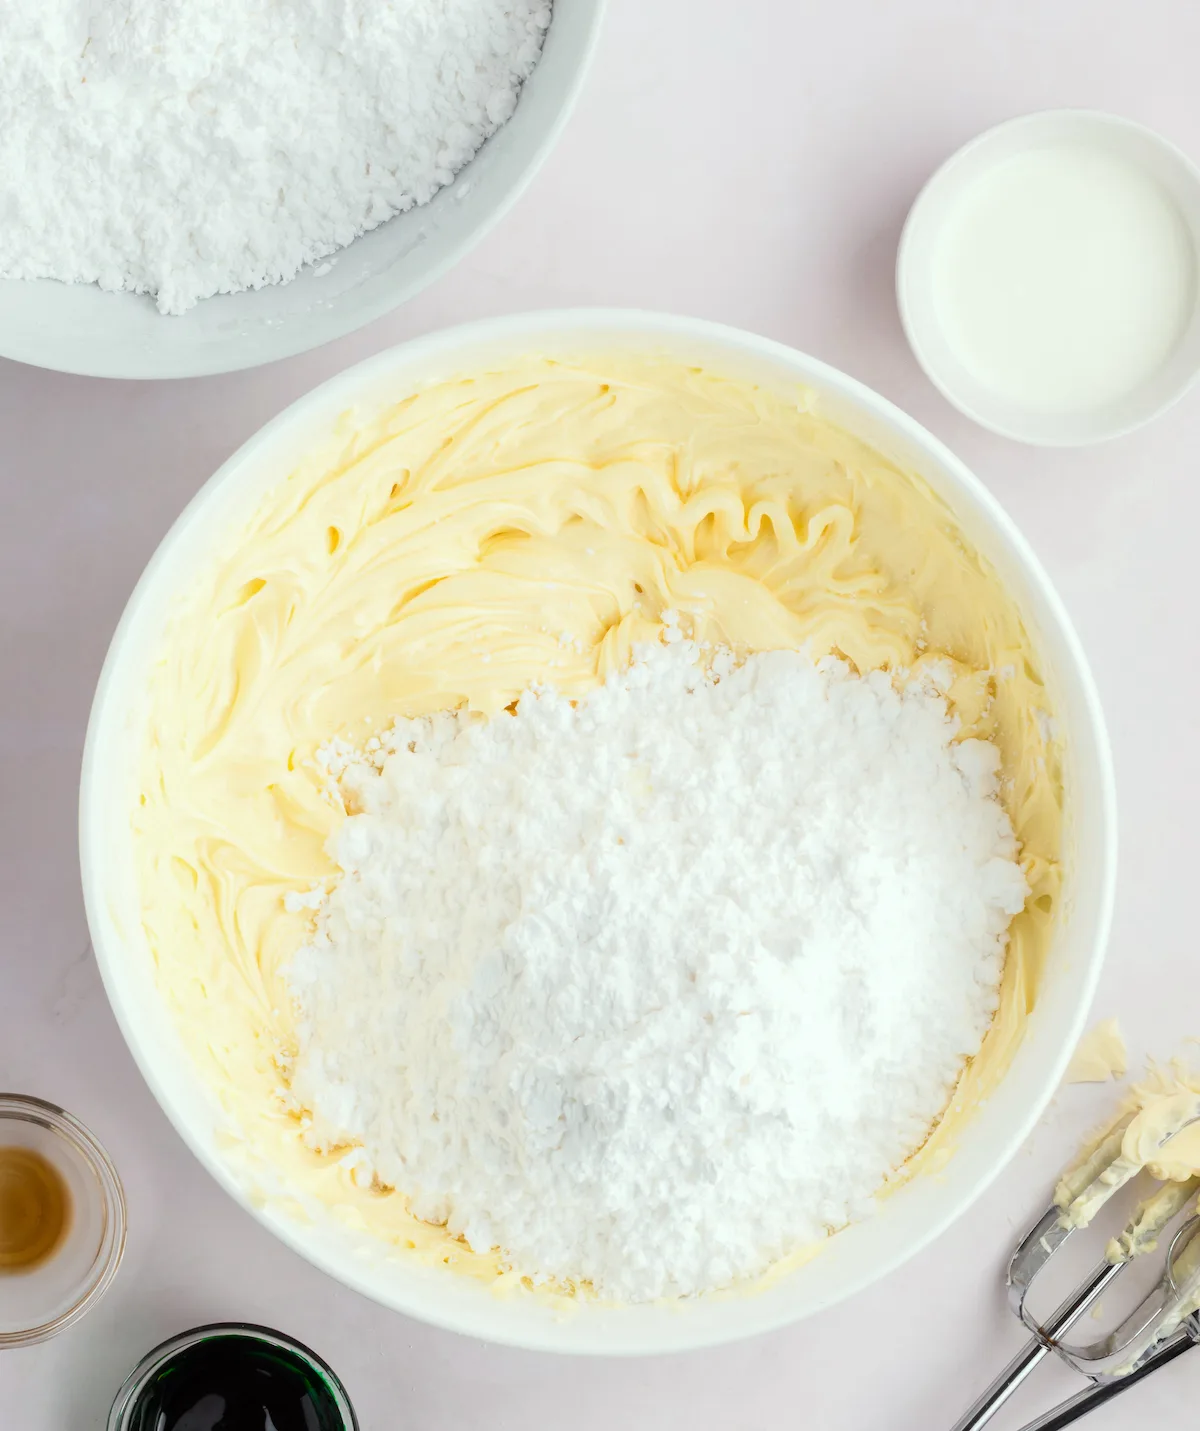 Powdered sugar added to creamed butter to make icing